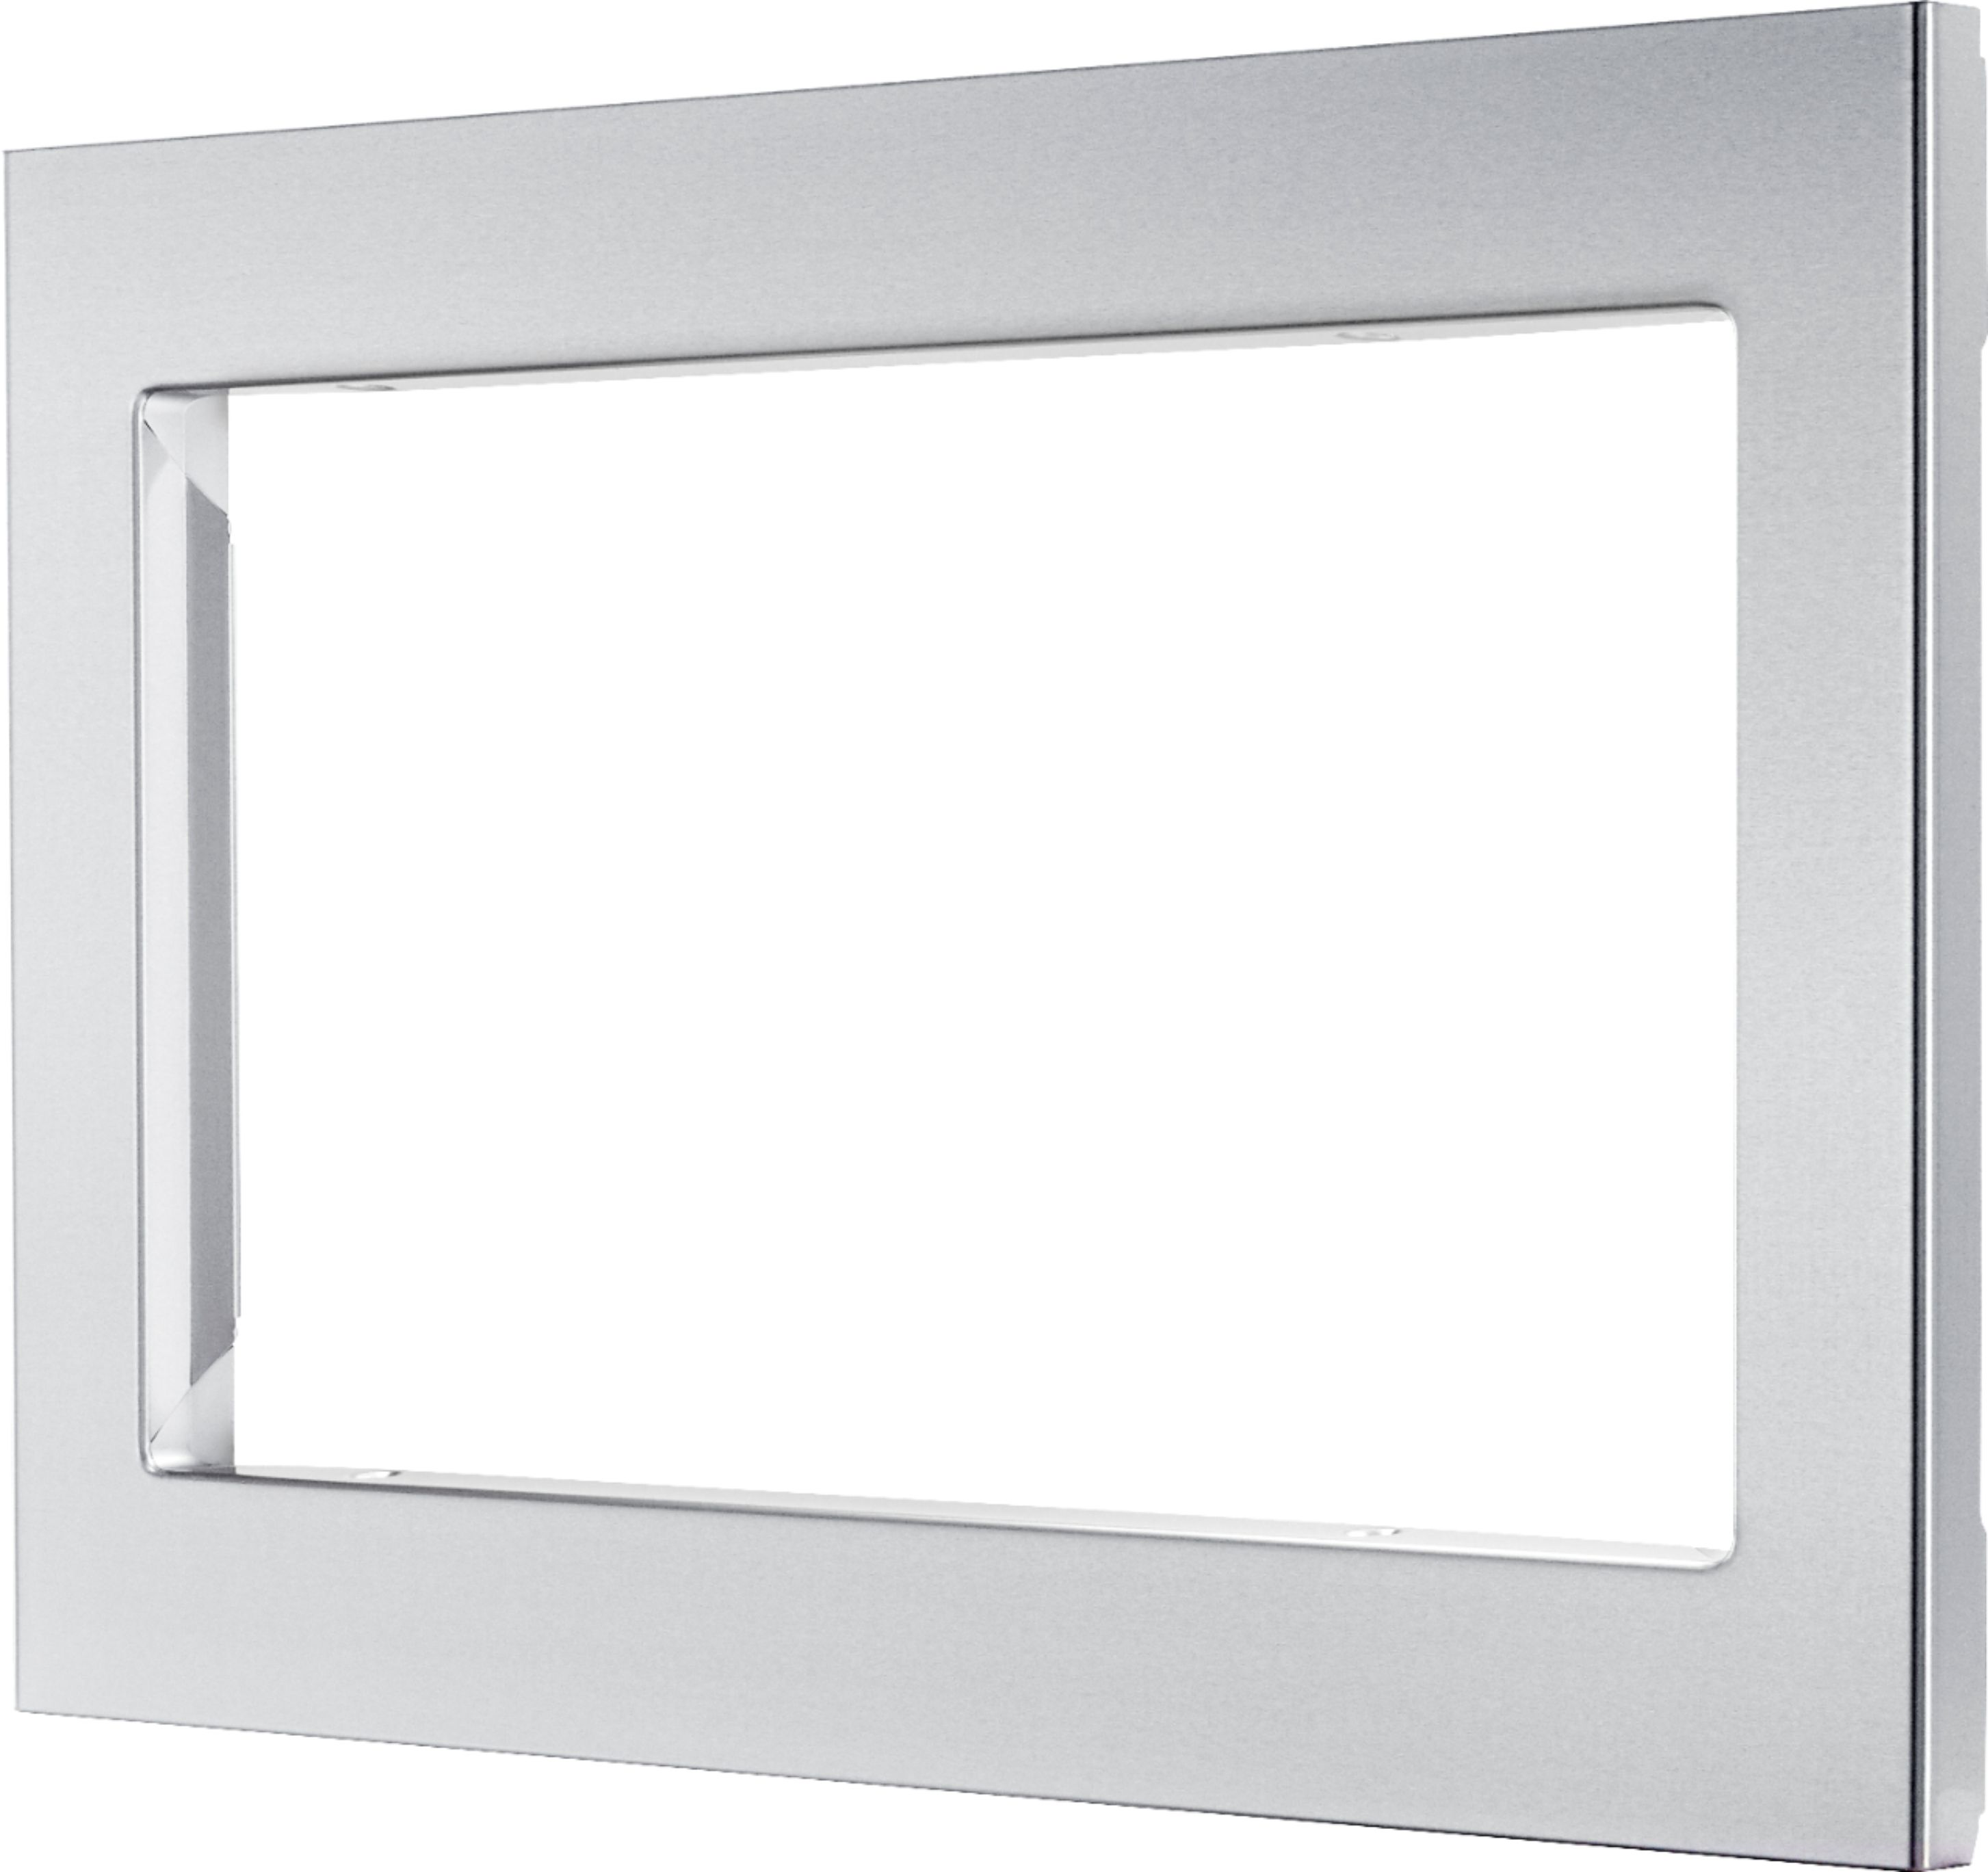 Left View: 29.7" Trim Kit for LG Microwaves - Stainless Steel